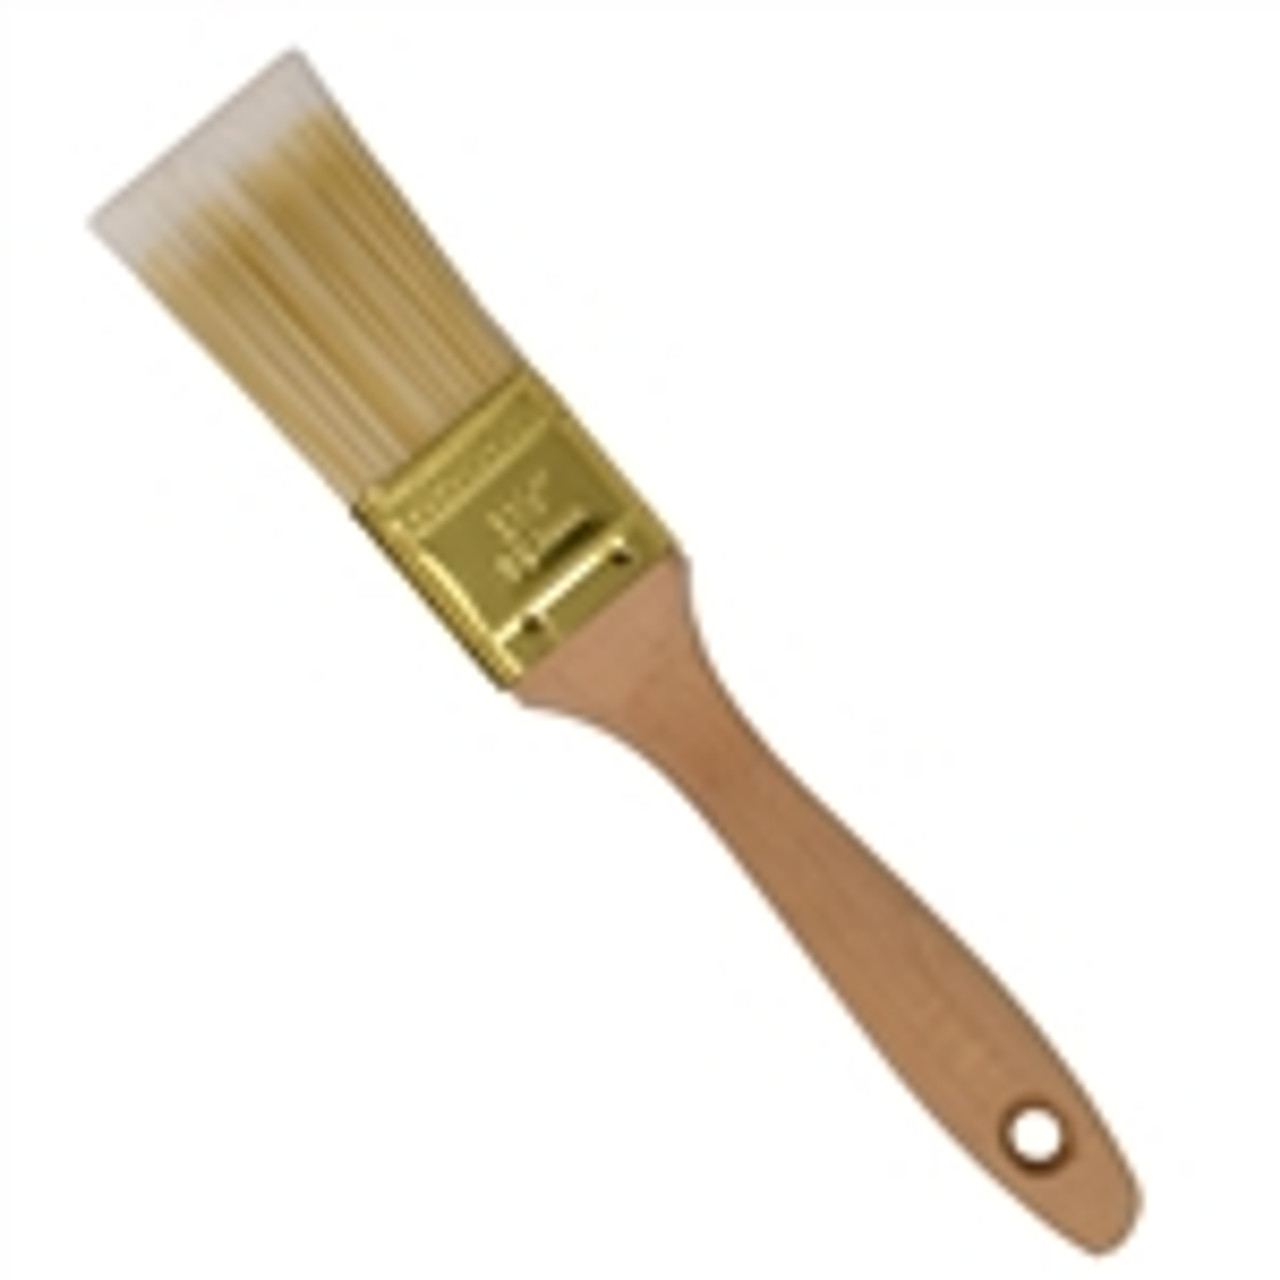 Flat-Cut Polyester Paint Brush with Wooden Handle - 1.5 Inches